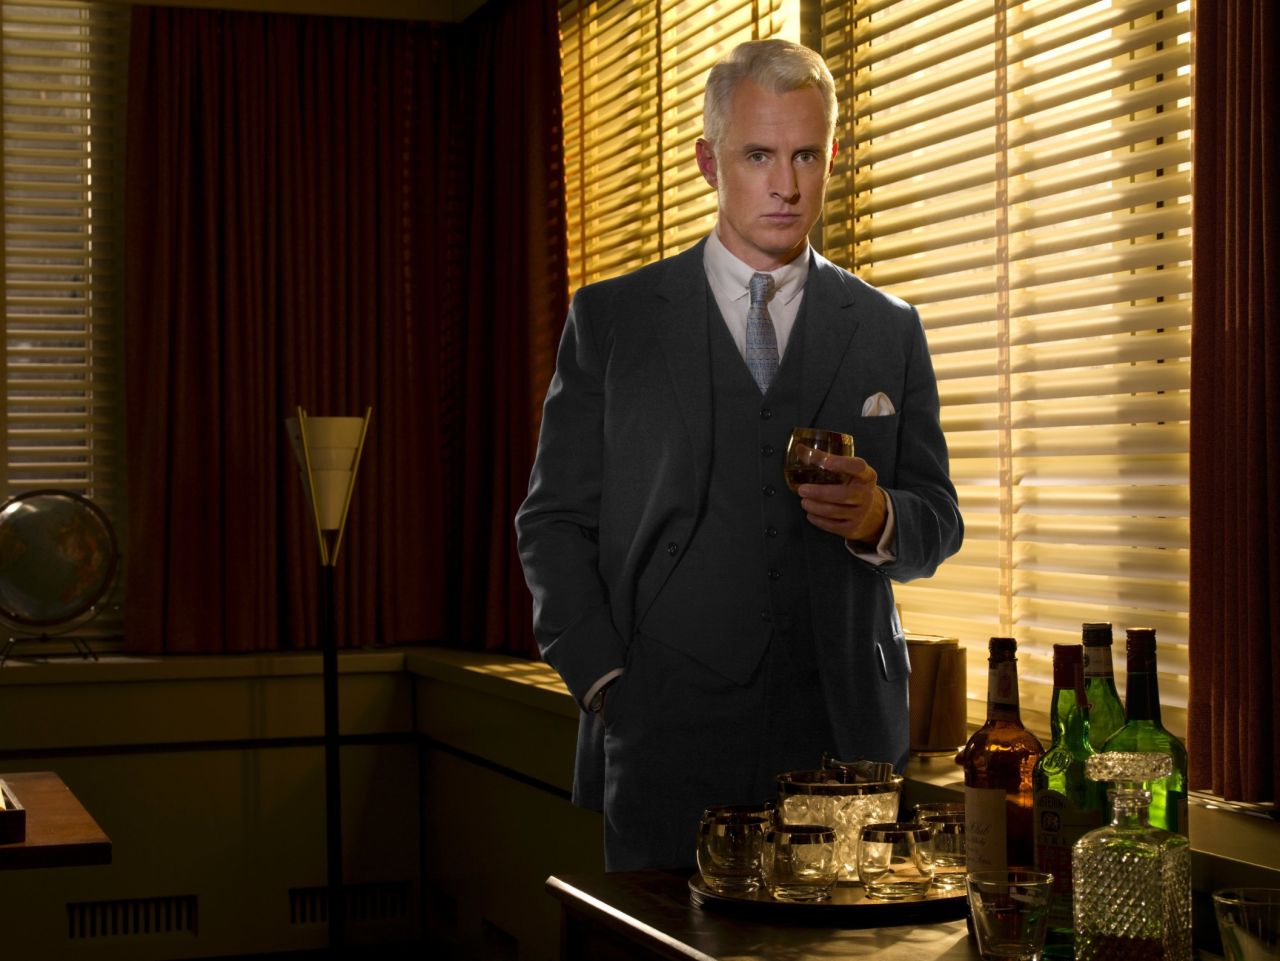 John Slattery plays Roger Sterling, here in season 2, set in the year 1962. Sterling's father co-founded the agency Sterling Cooper.